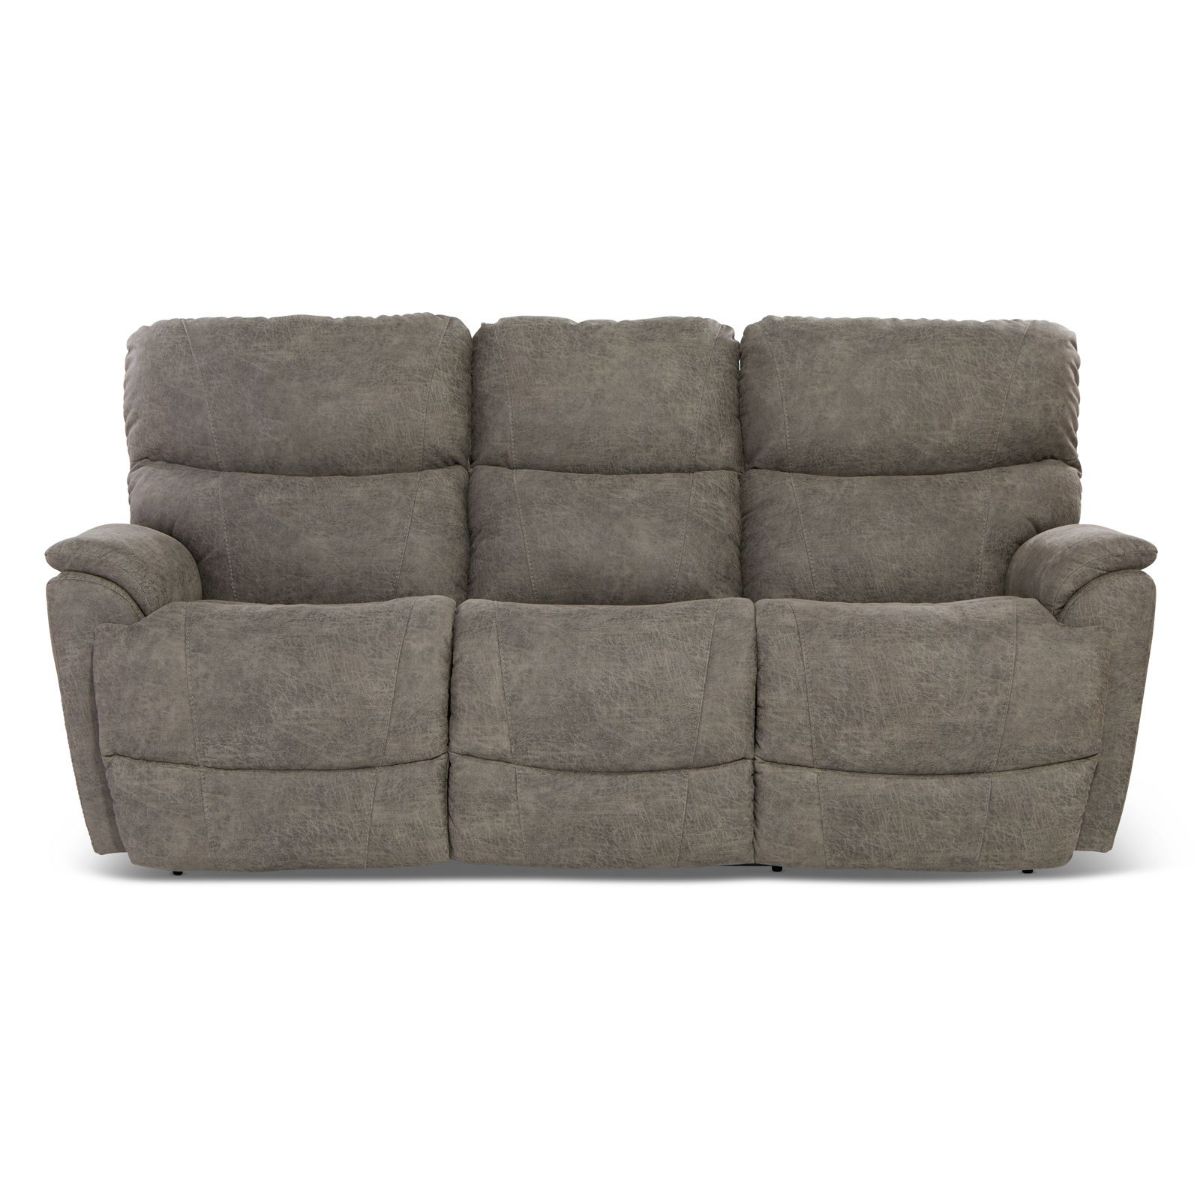 Picture of Trouper Sable Recliner Sofa